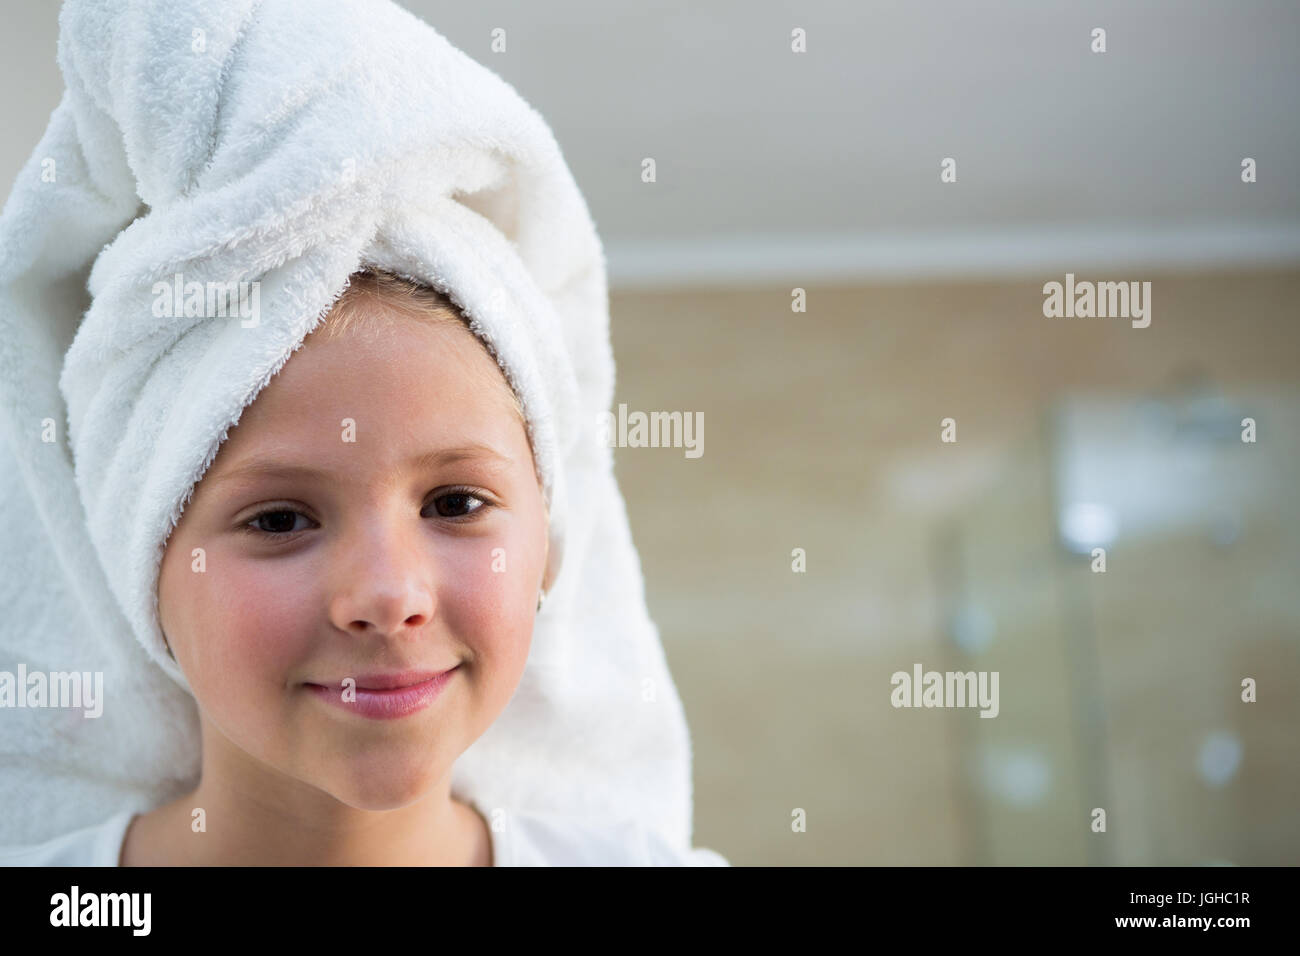 Portrait of girl with hair wrapped in towel bathroom Stock Photo